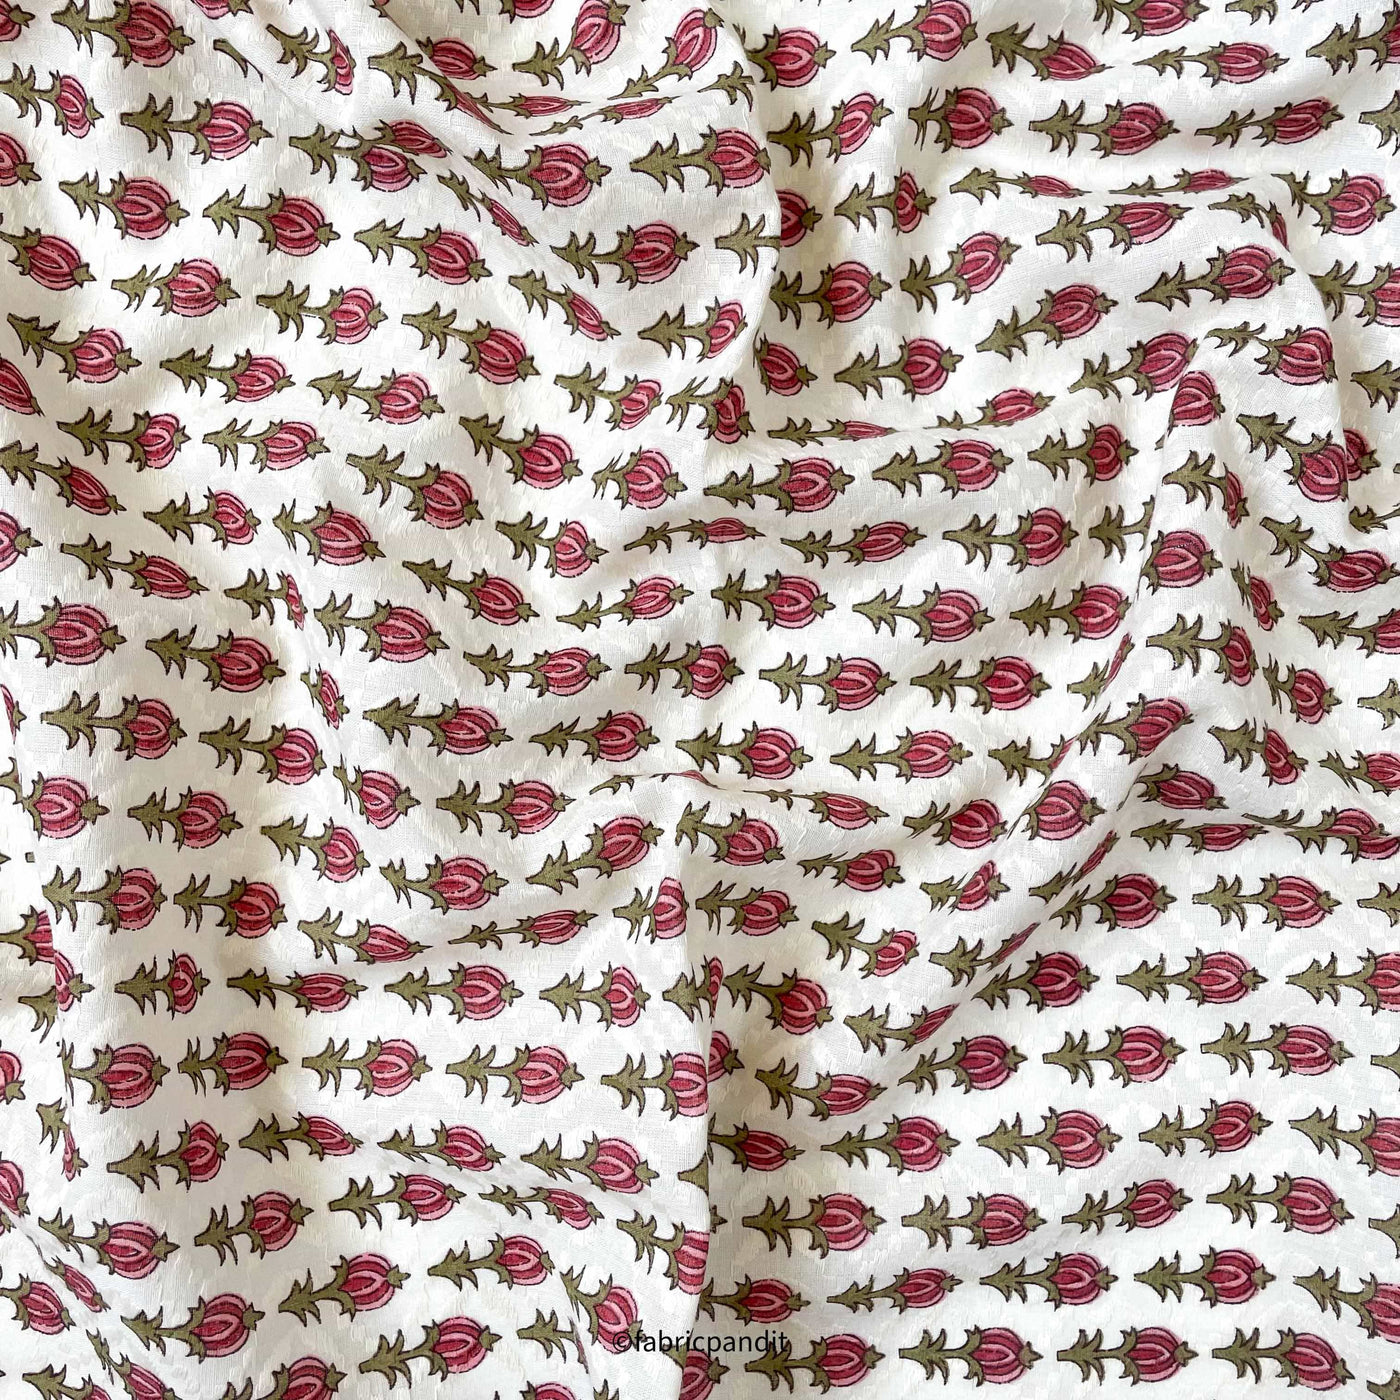 Hand Block Printed Cotton Fabric Cut Piece (CUT PIECE) Pink & Green Pumpkin Flower Hand Block Printed Pure Cotton Dobby Fabric (Width 42 inches)